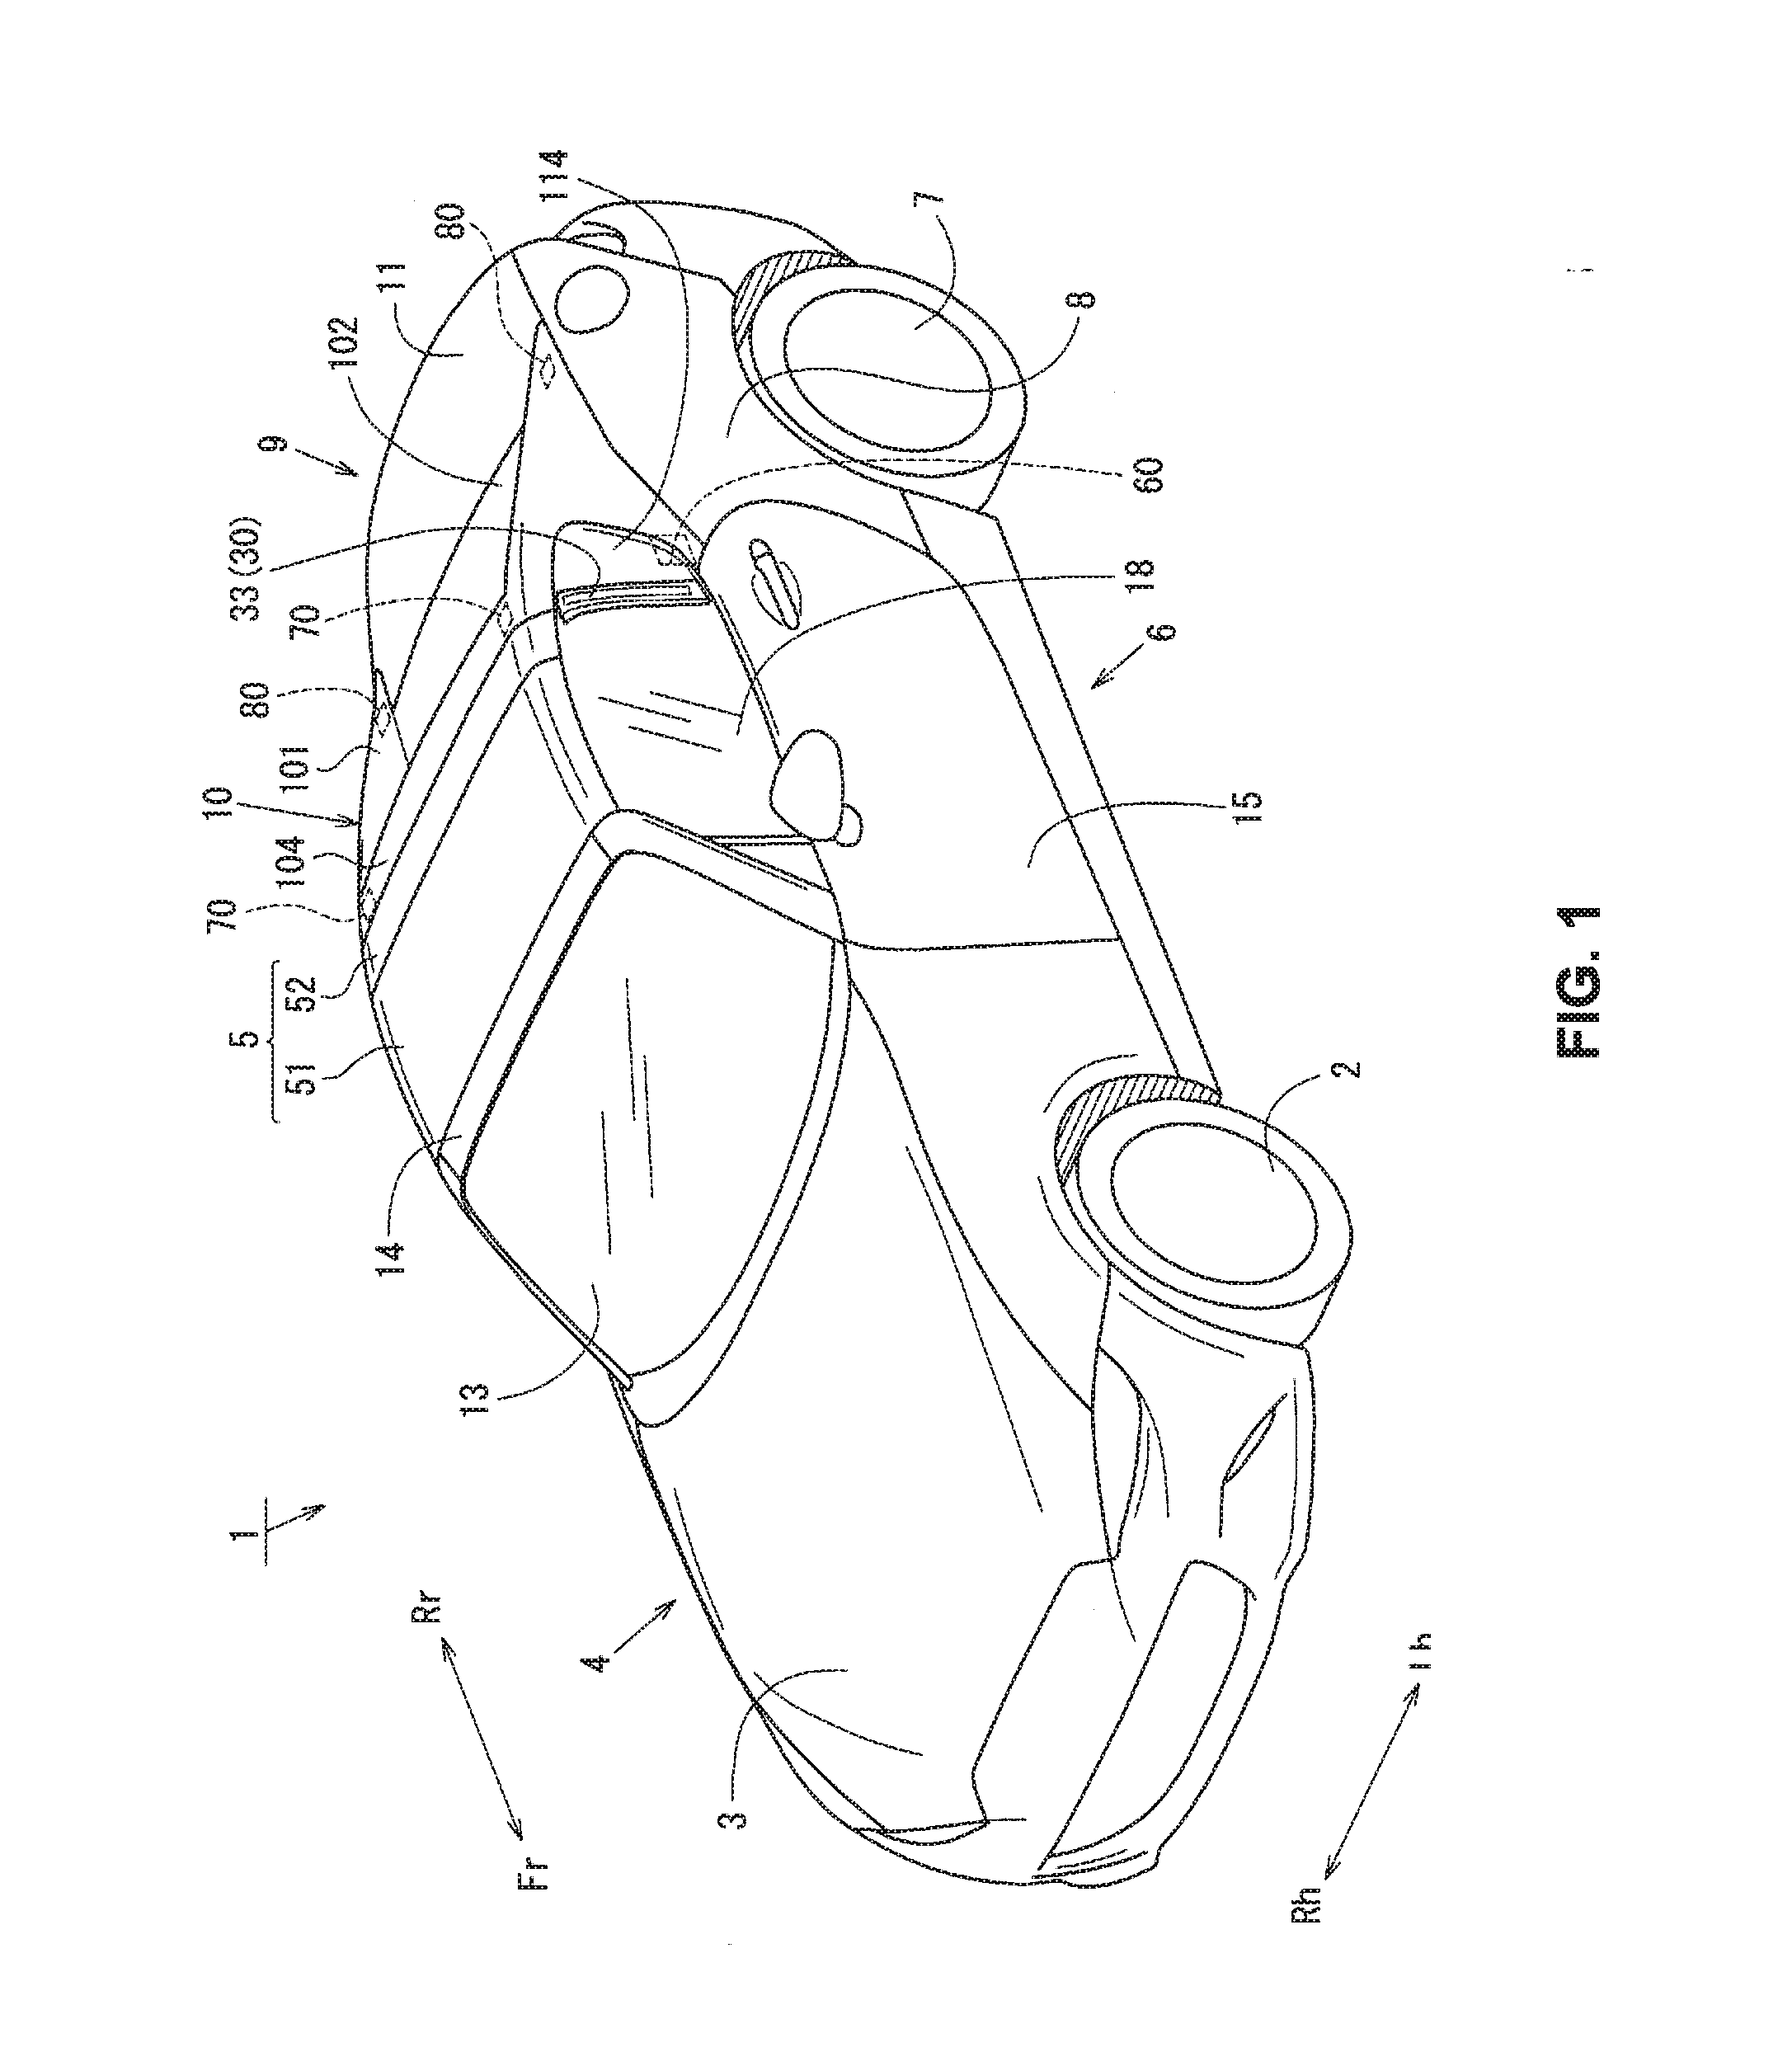 Rear vehicle-body structure of vehicle